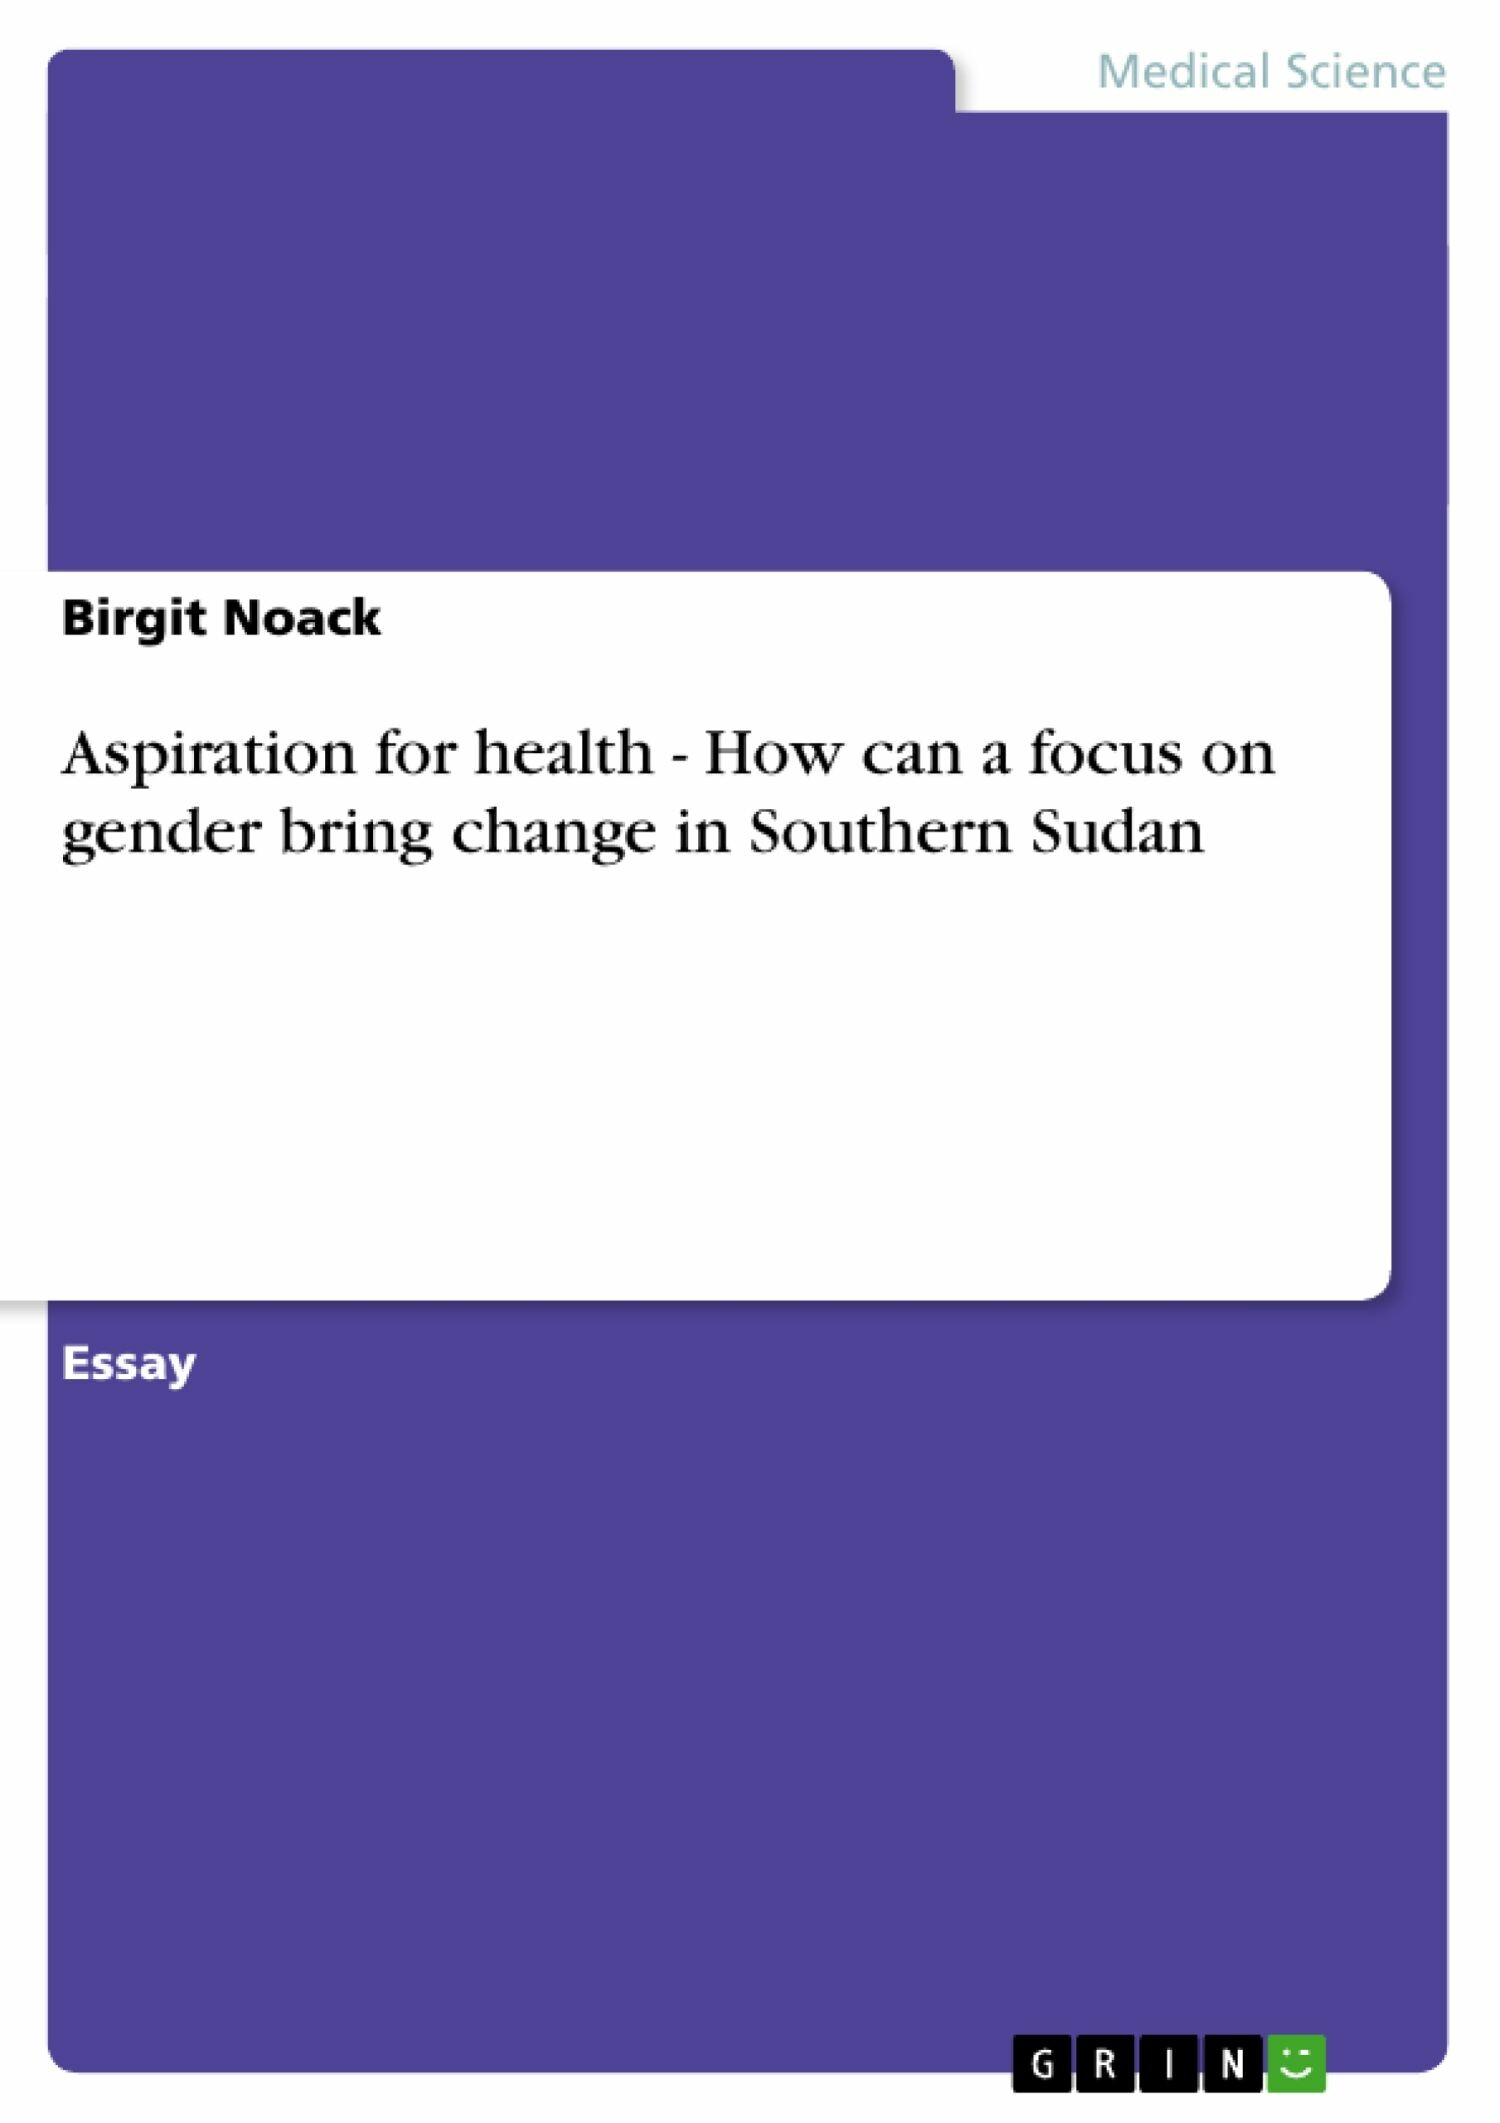 Aspiration for health - How can a focus on gender bring change in Southern Sudan